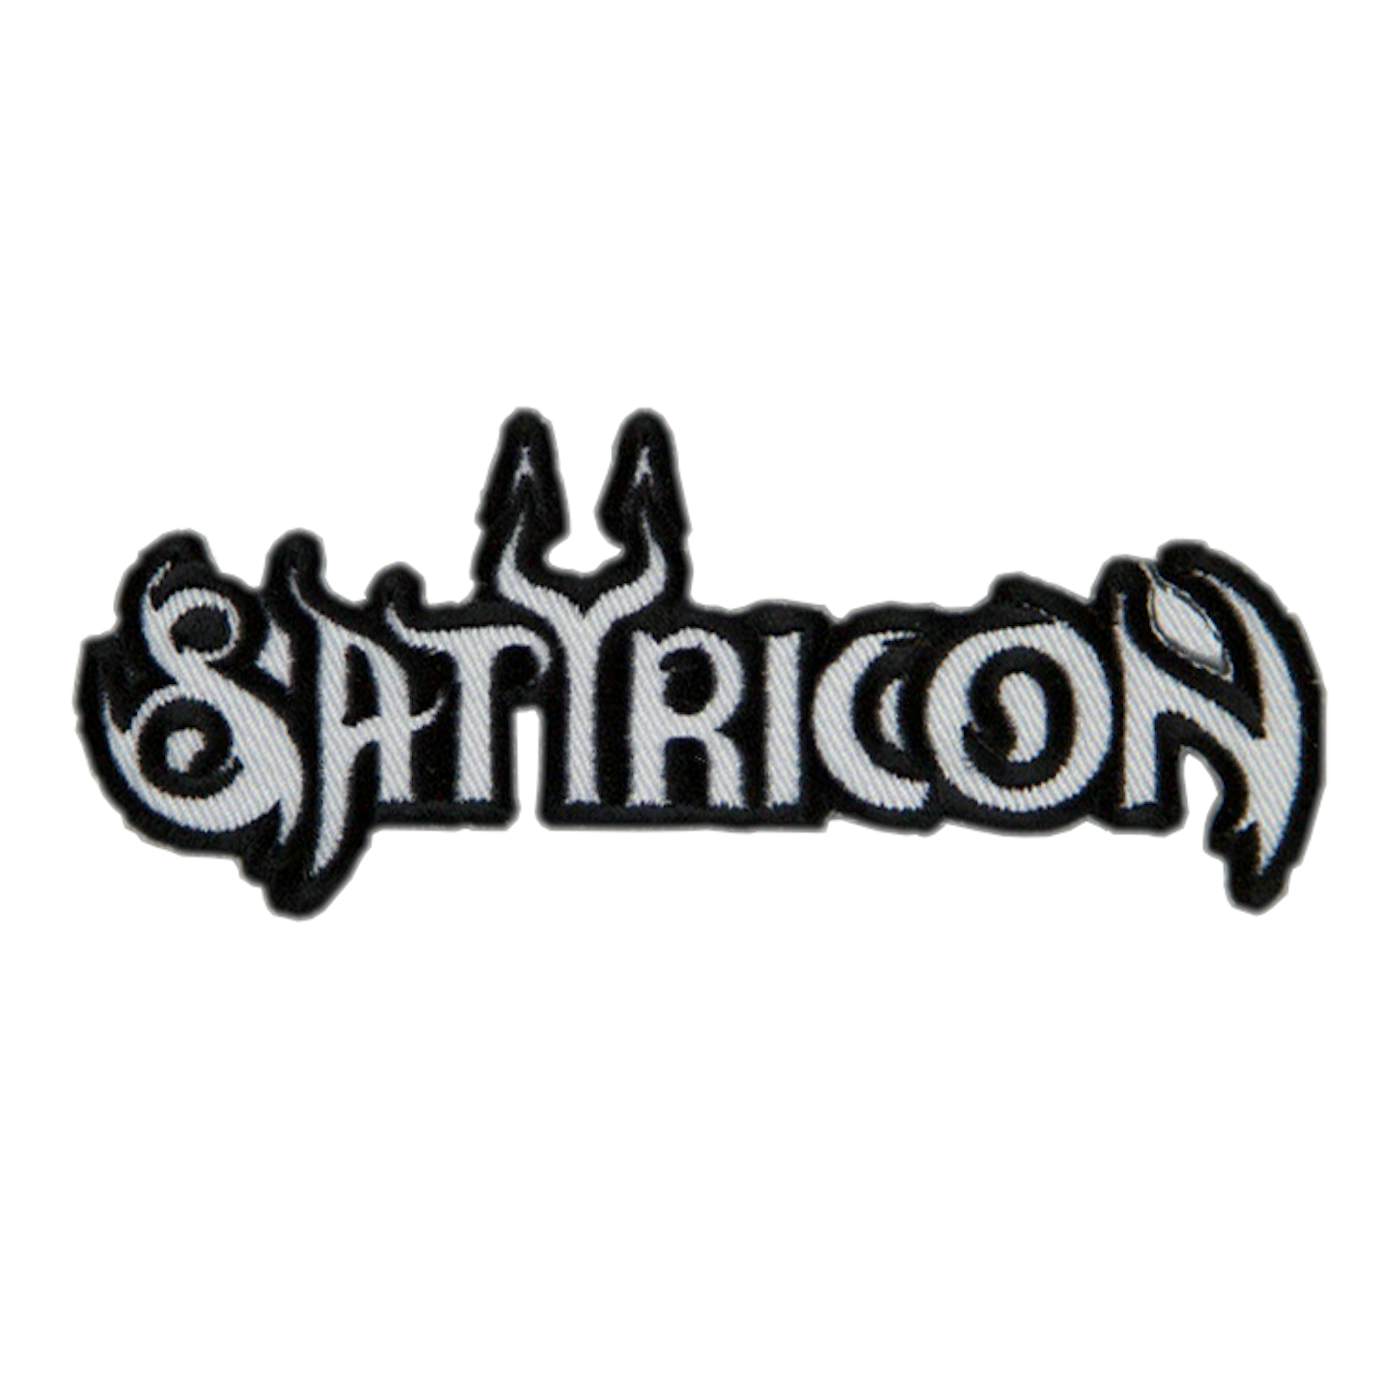 SATYRICON - 'Logo' Cut Out Patch